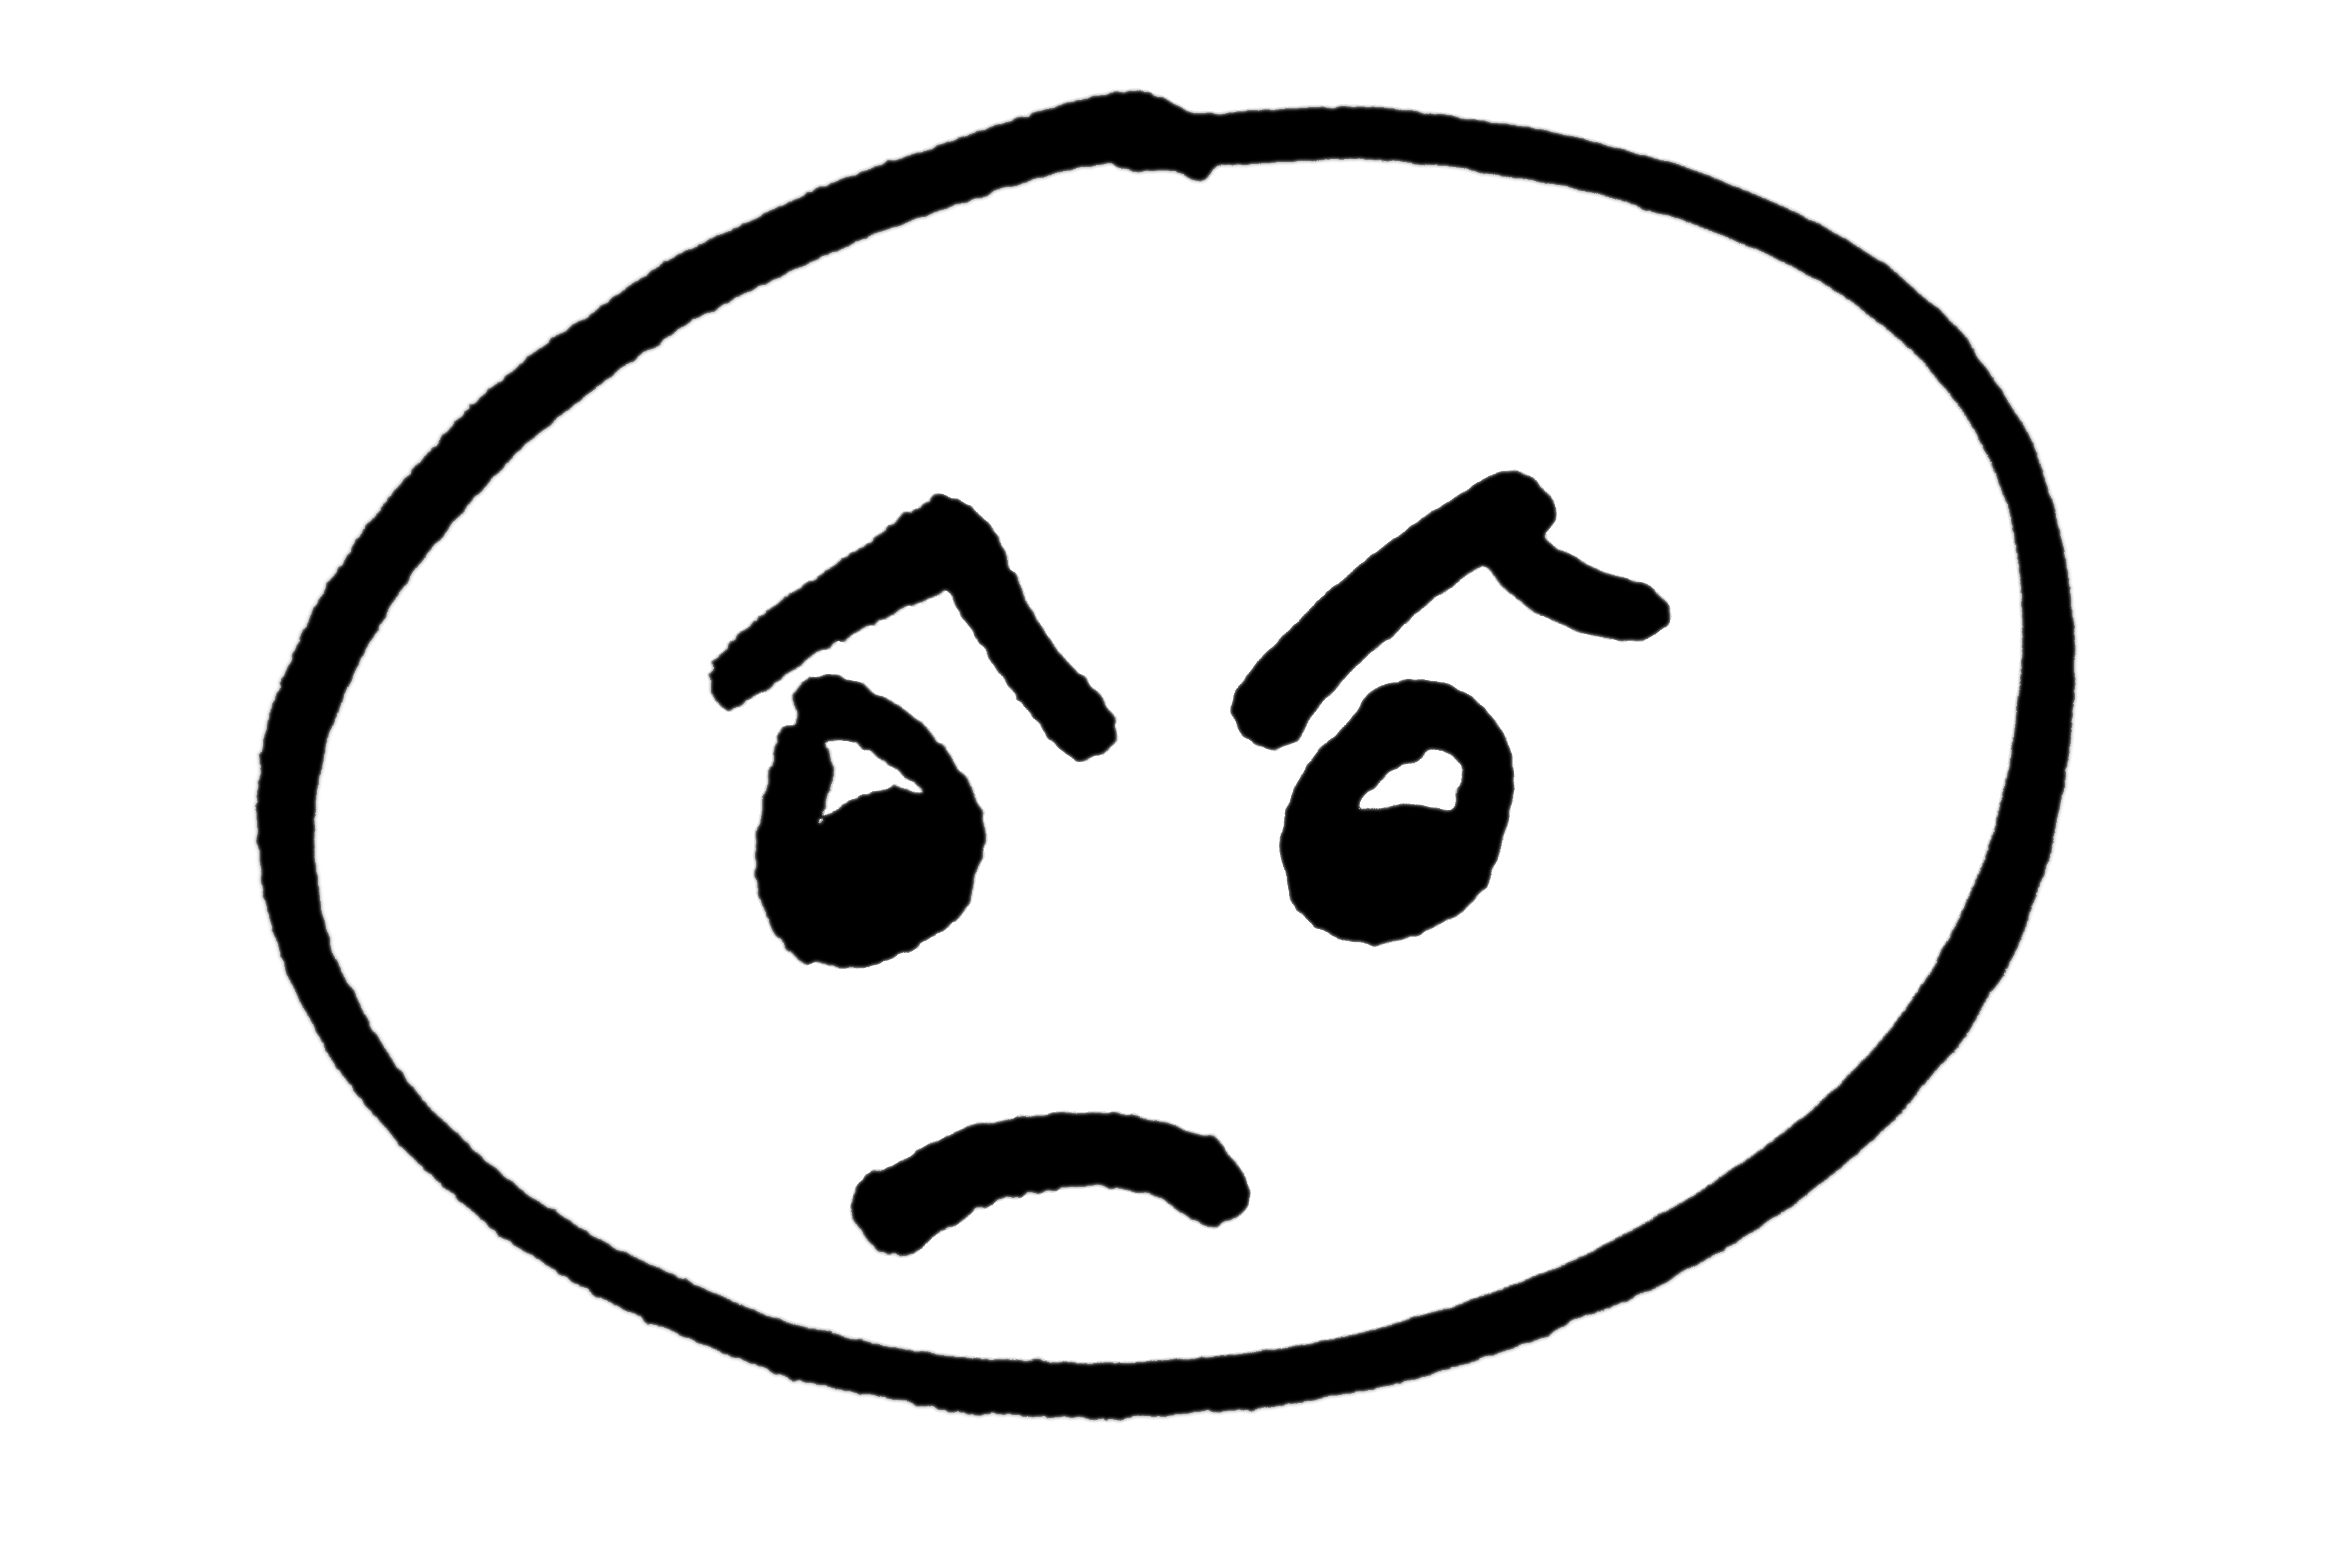 Angry Face Clip Art   Free High Resolution Image   Dimensions  3888